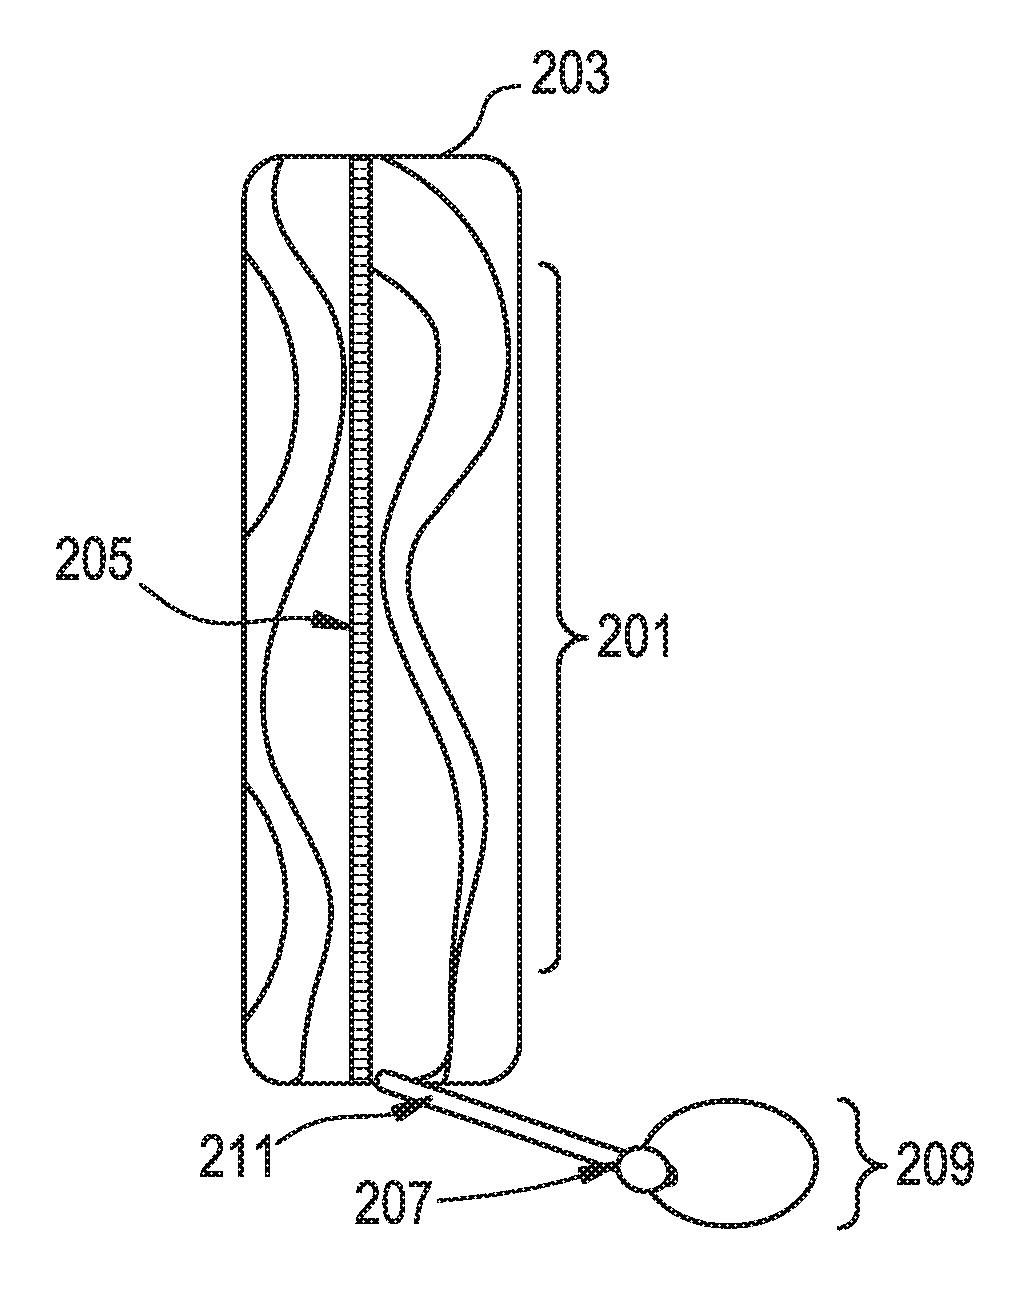 Personal hygiene product with a digital element